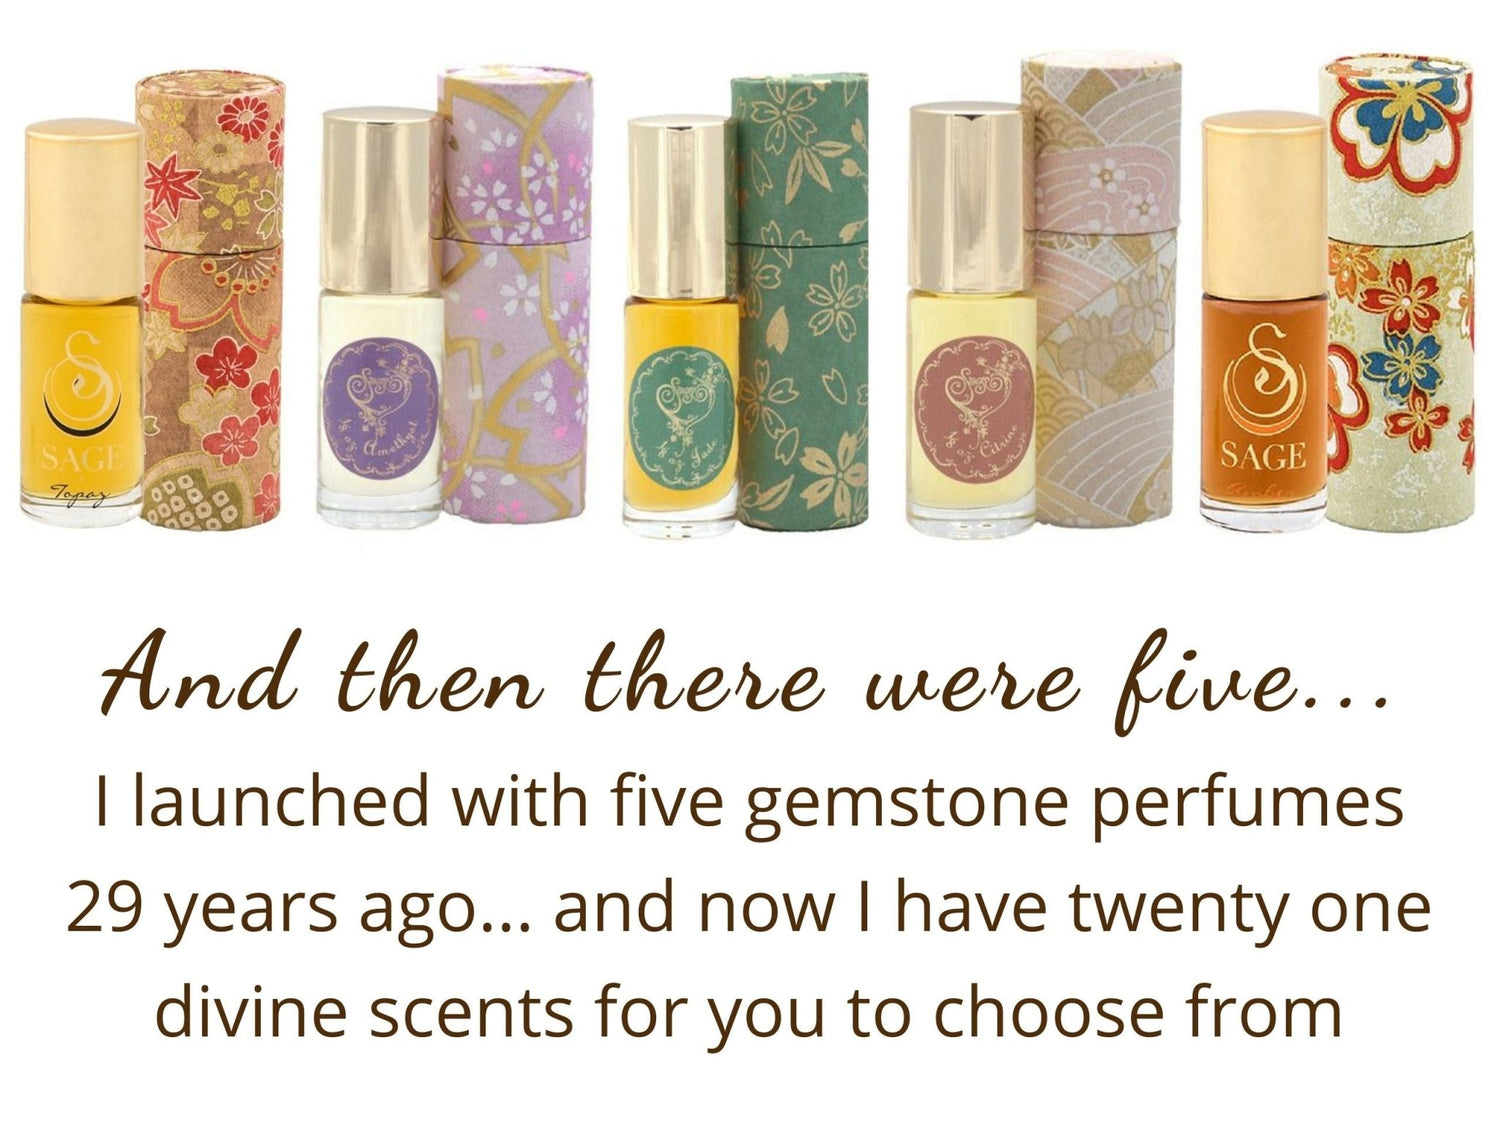 The Birth of My Gemstone Perfumery and the Original Five Scents - The Sage Lifestyle